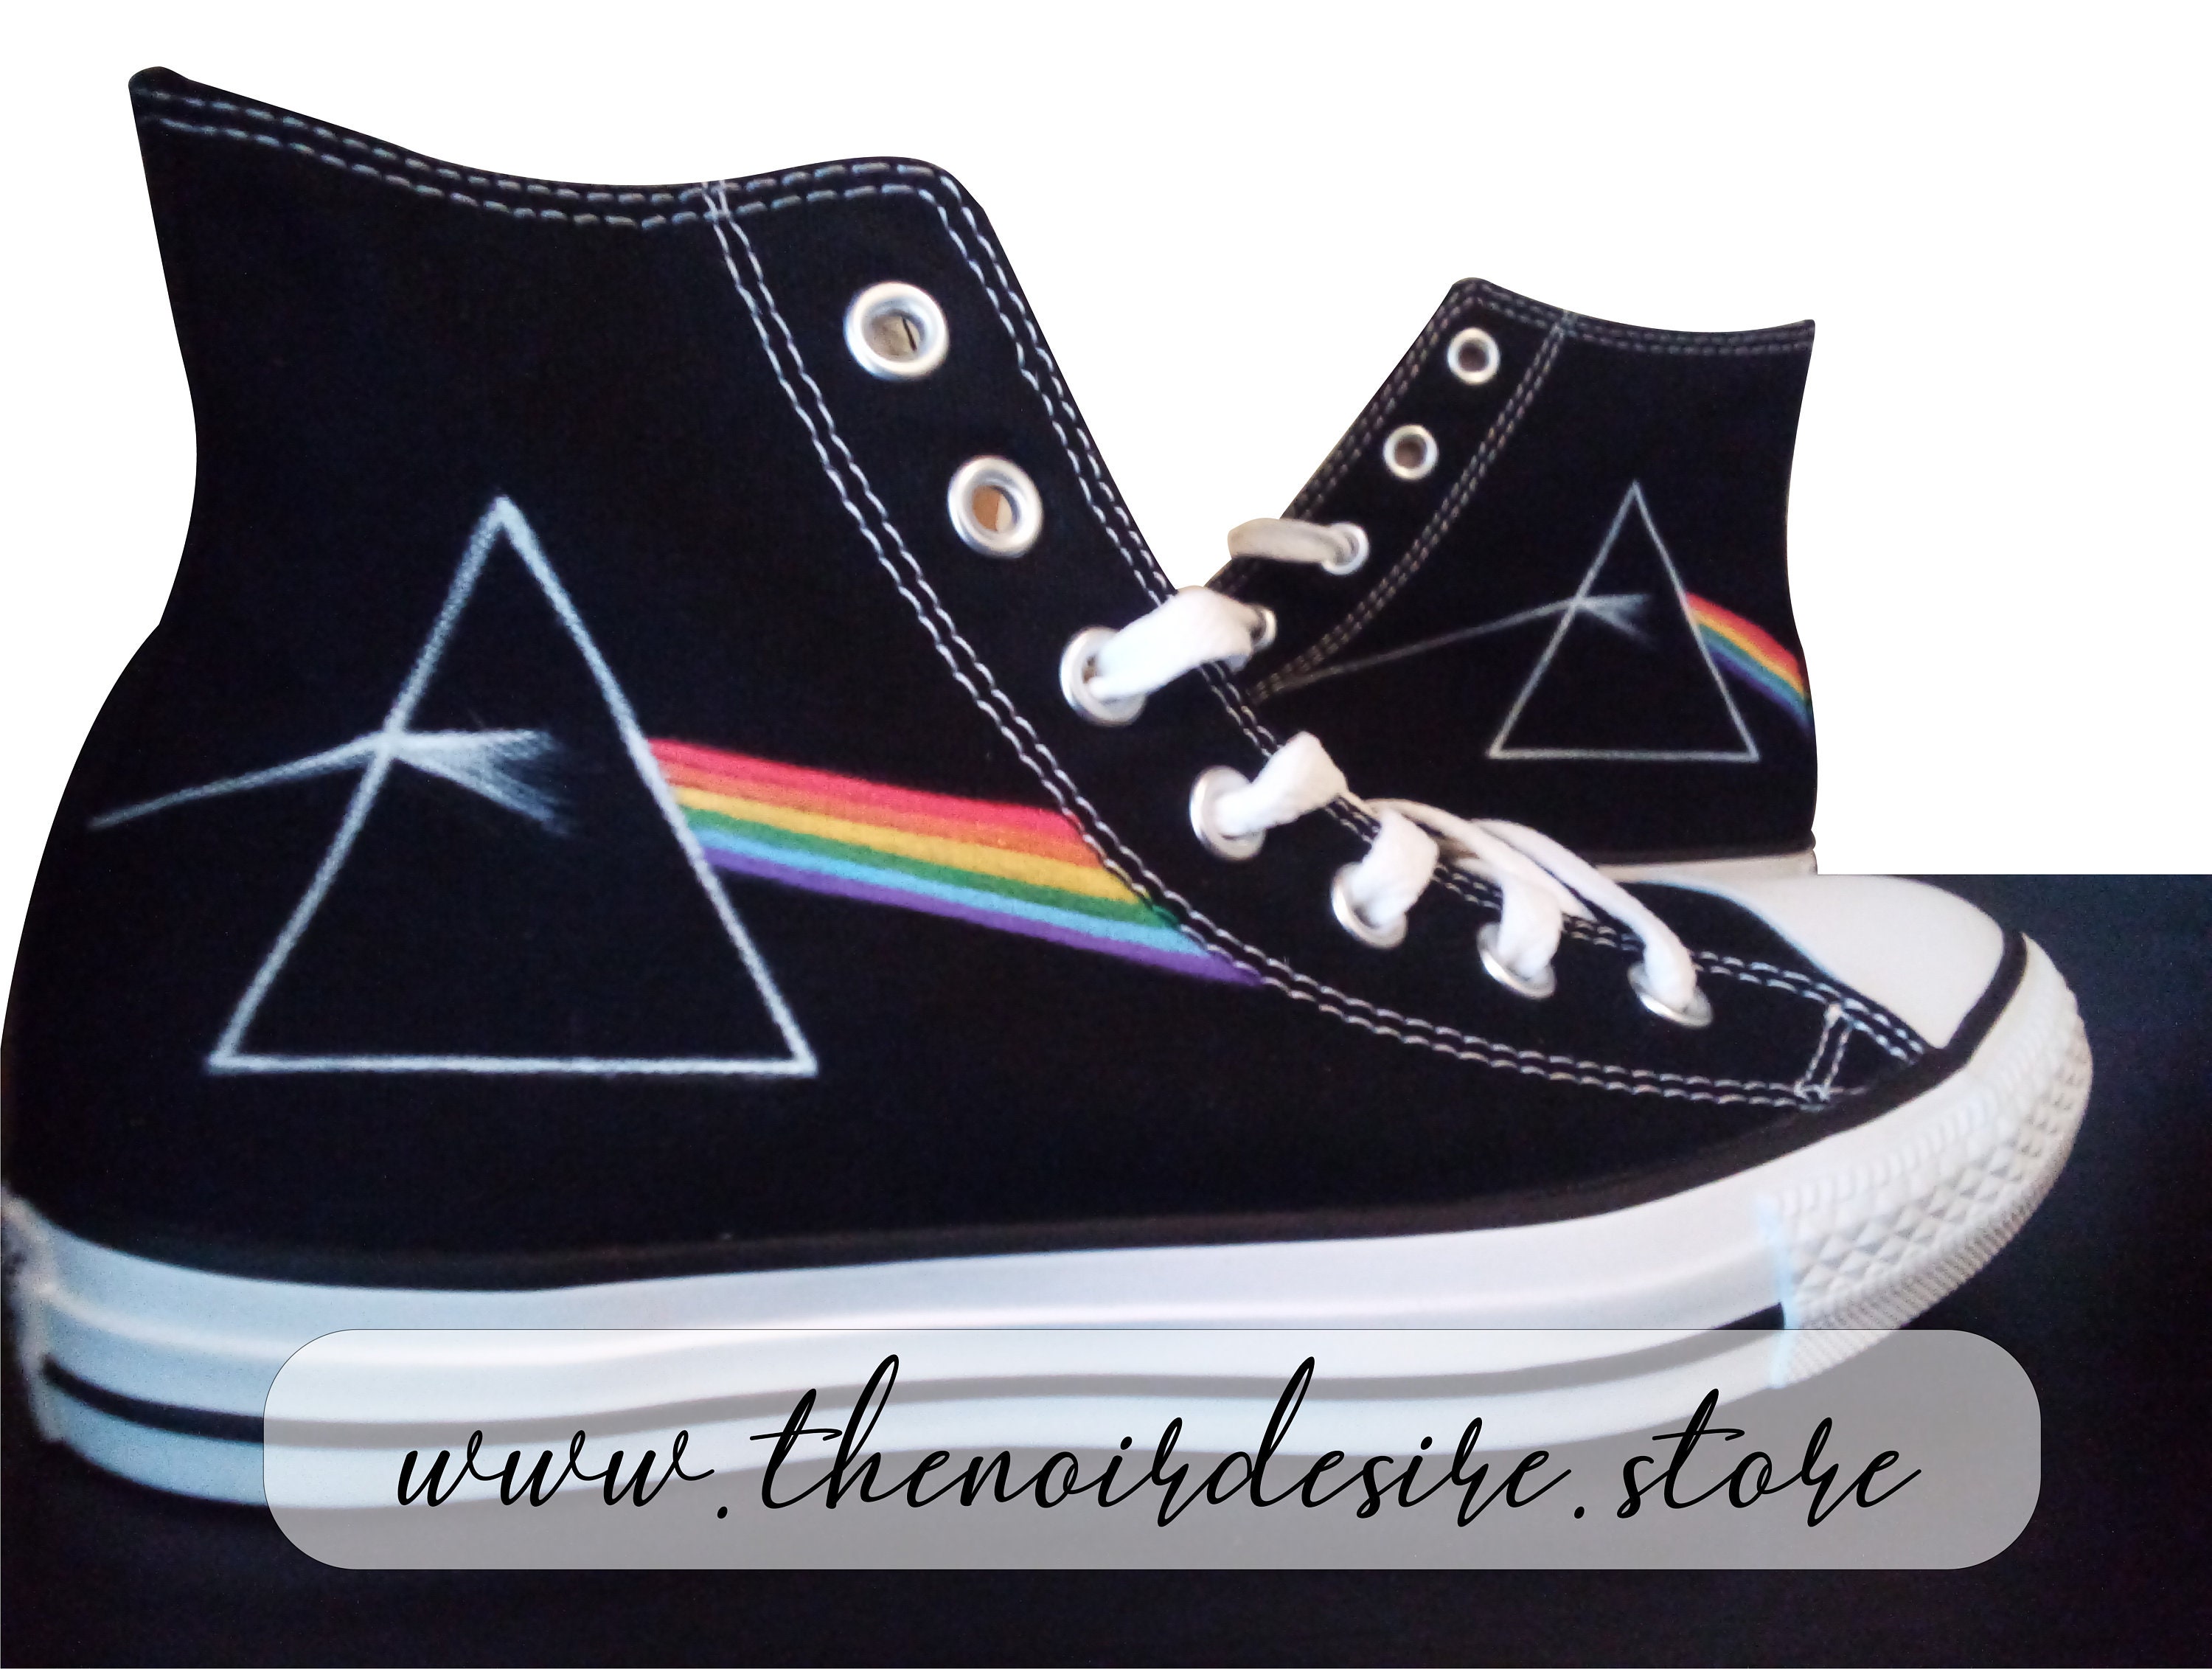 The Dark Side of the Moon Converse Personalizzate - Norway